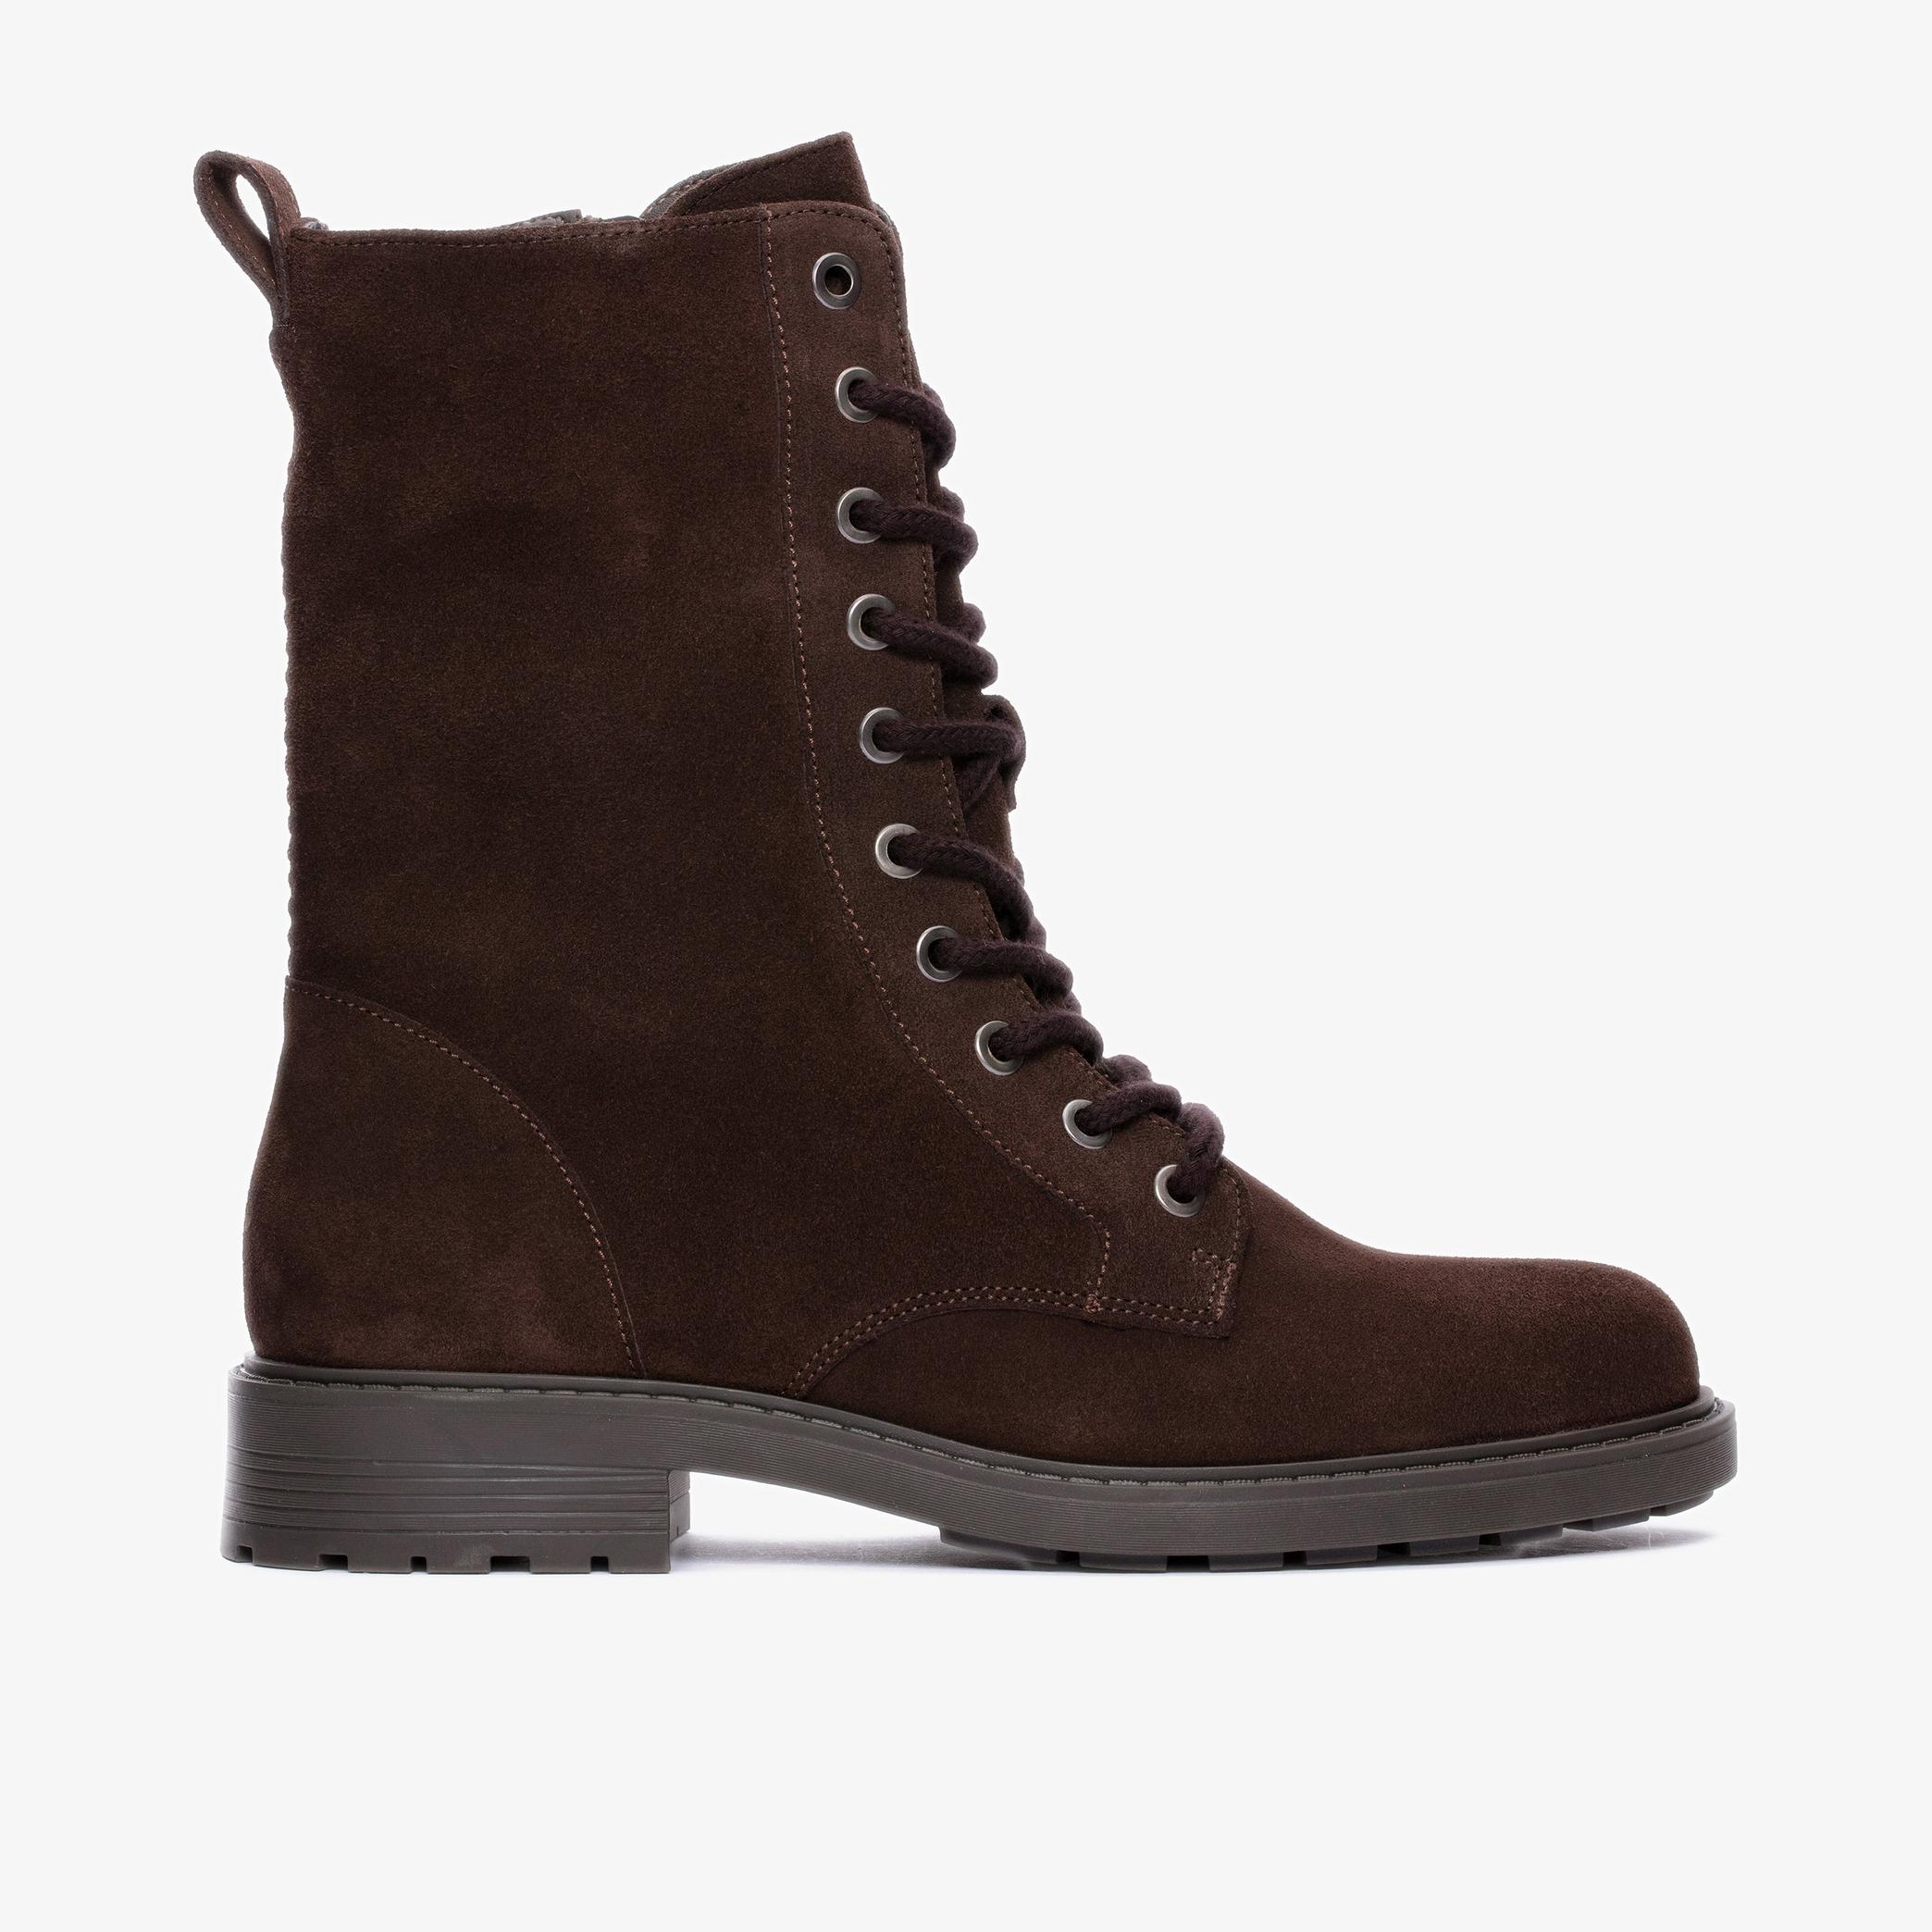 Orinoco2 Style Dark Brown Suede Ankle Boots, view 1 of 6